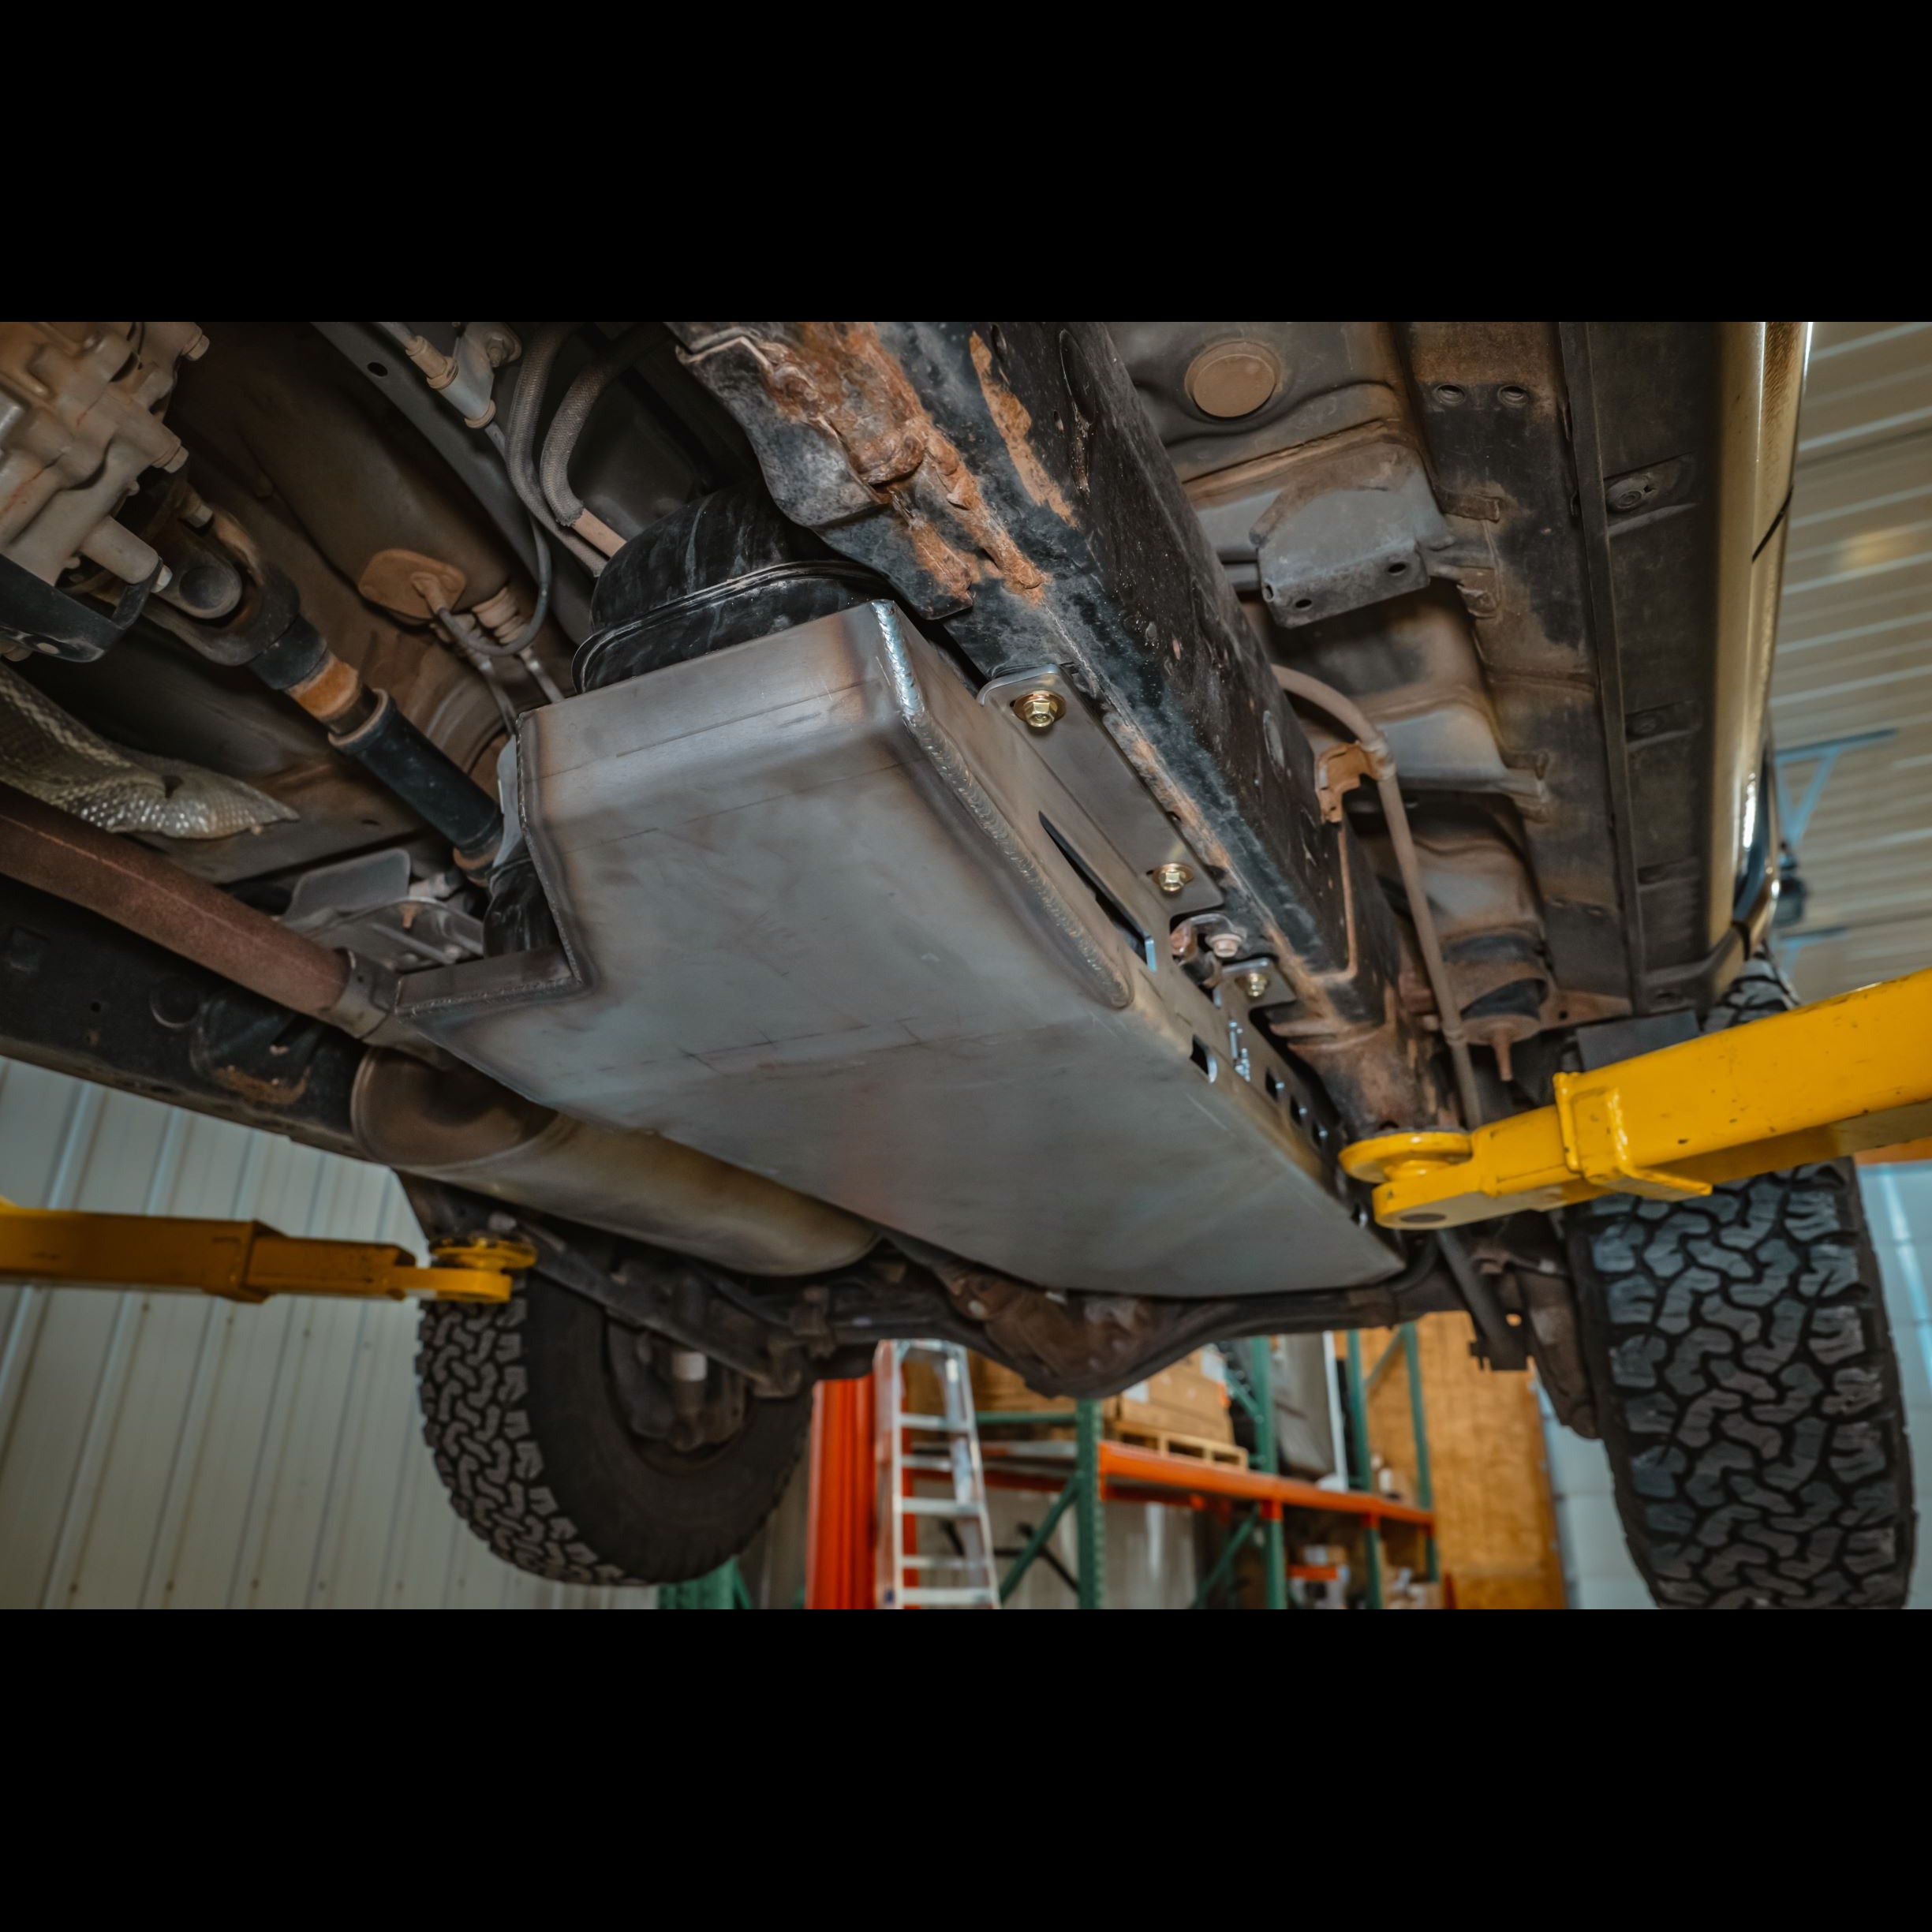 View of the weld quality of a C4 Fabrication 5th Gen 4Runner fuel tank skid plate